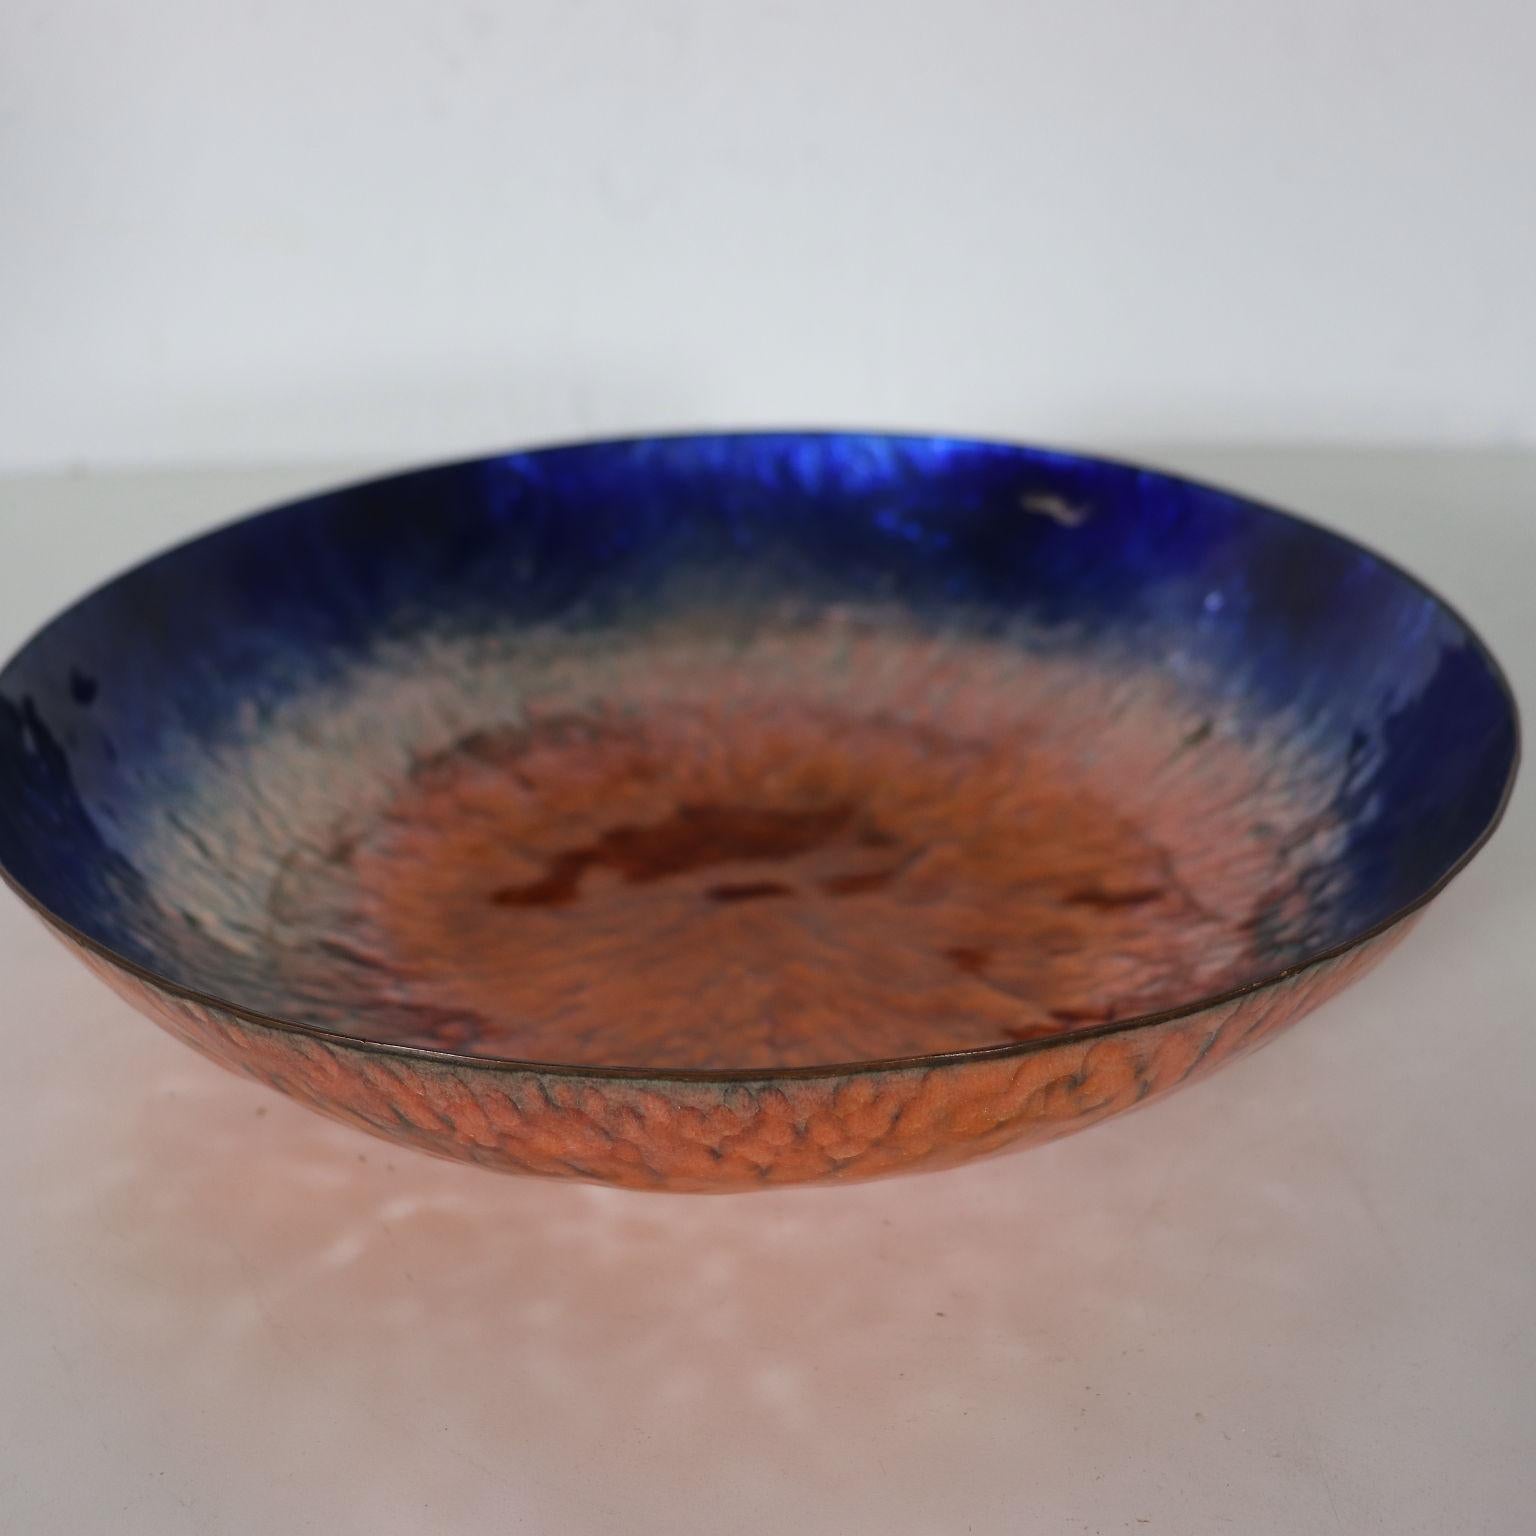 Hammered copper bowl enameled on fire. Internal part polychrome enameled. Author's signature under the base.